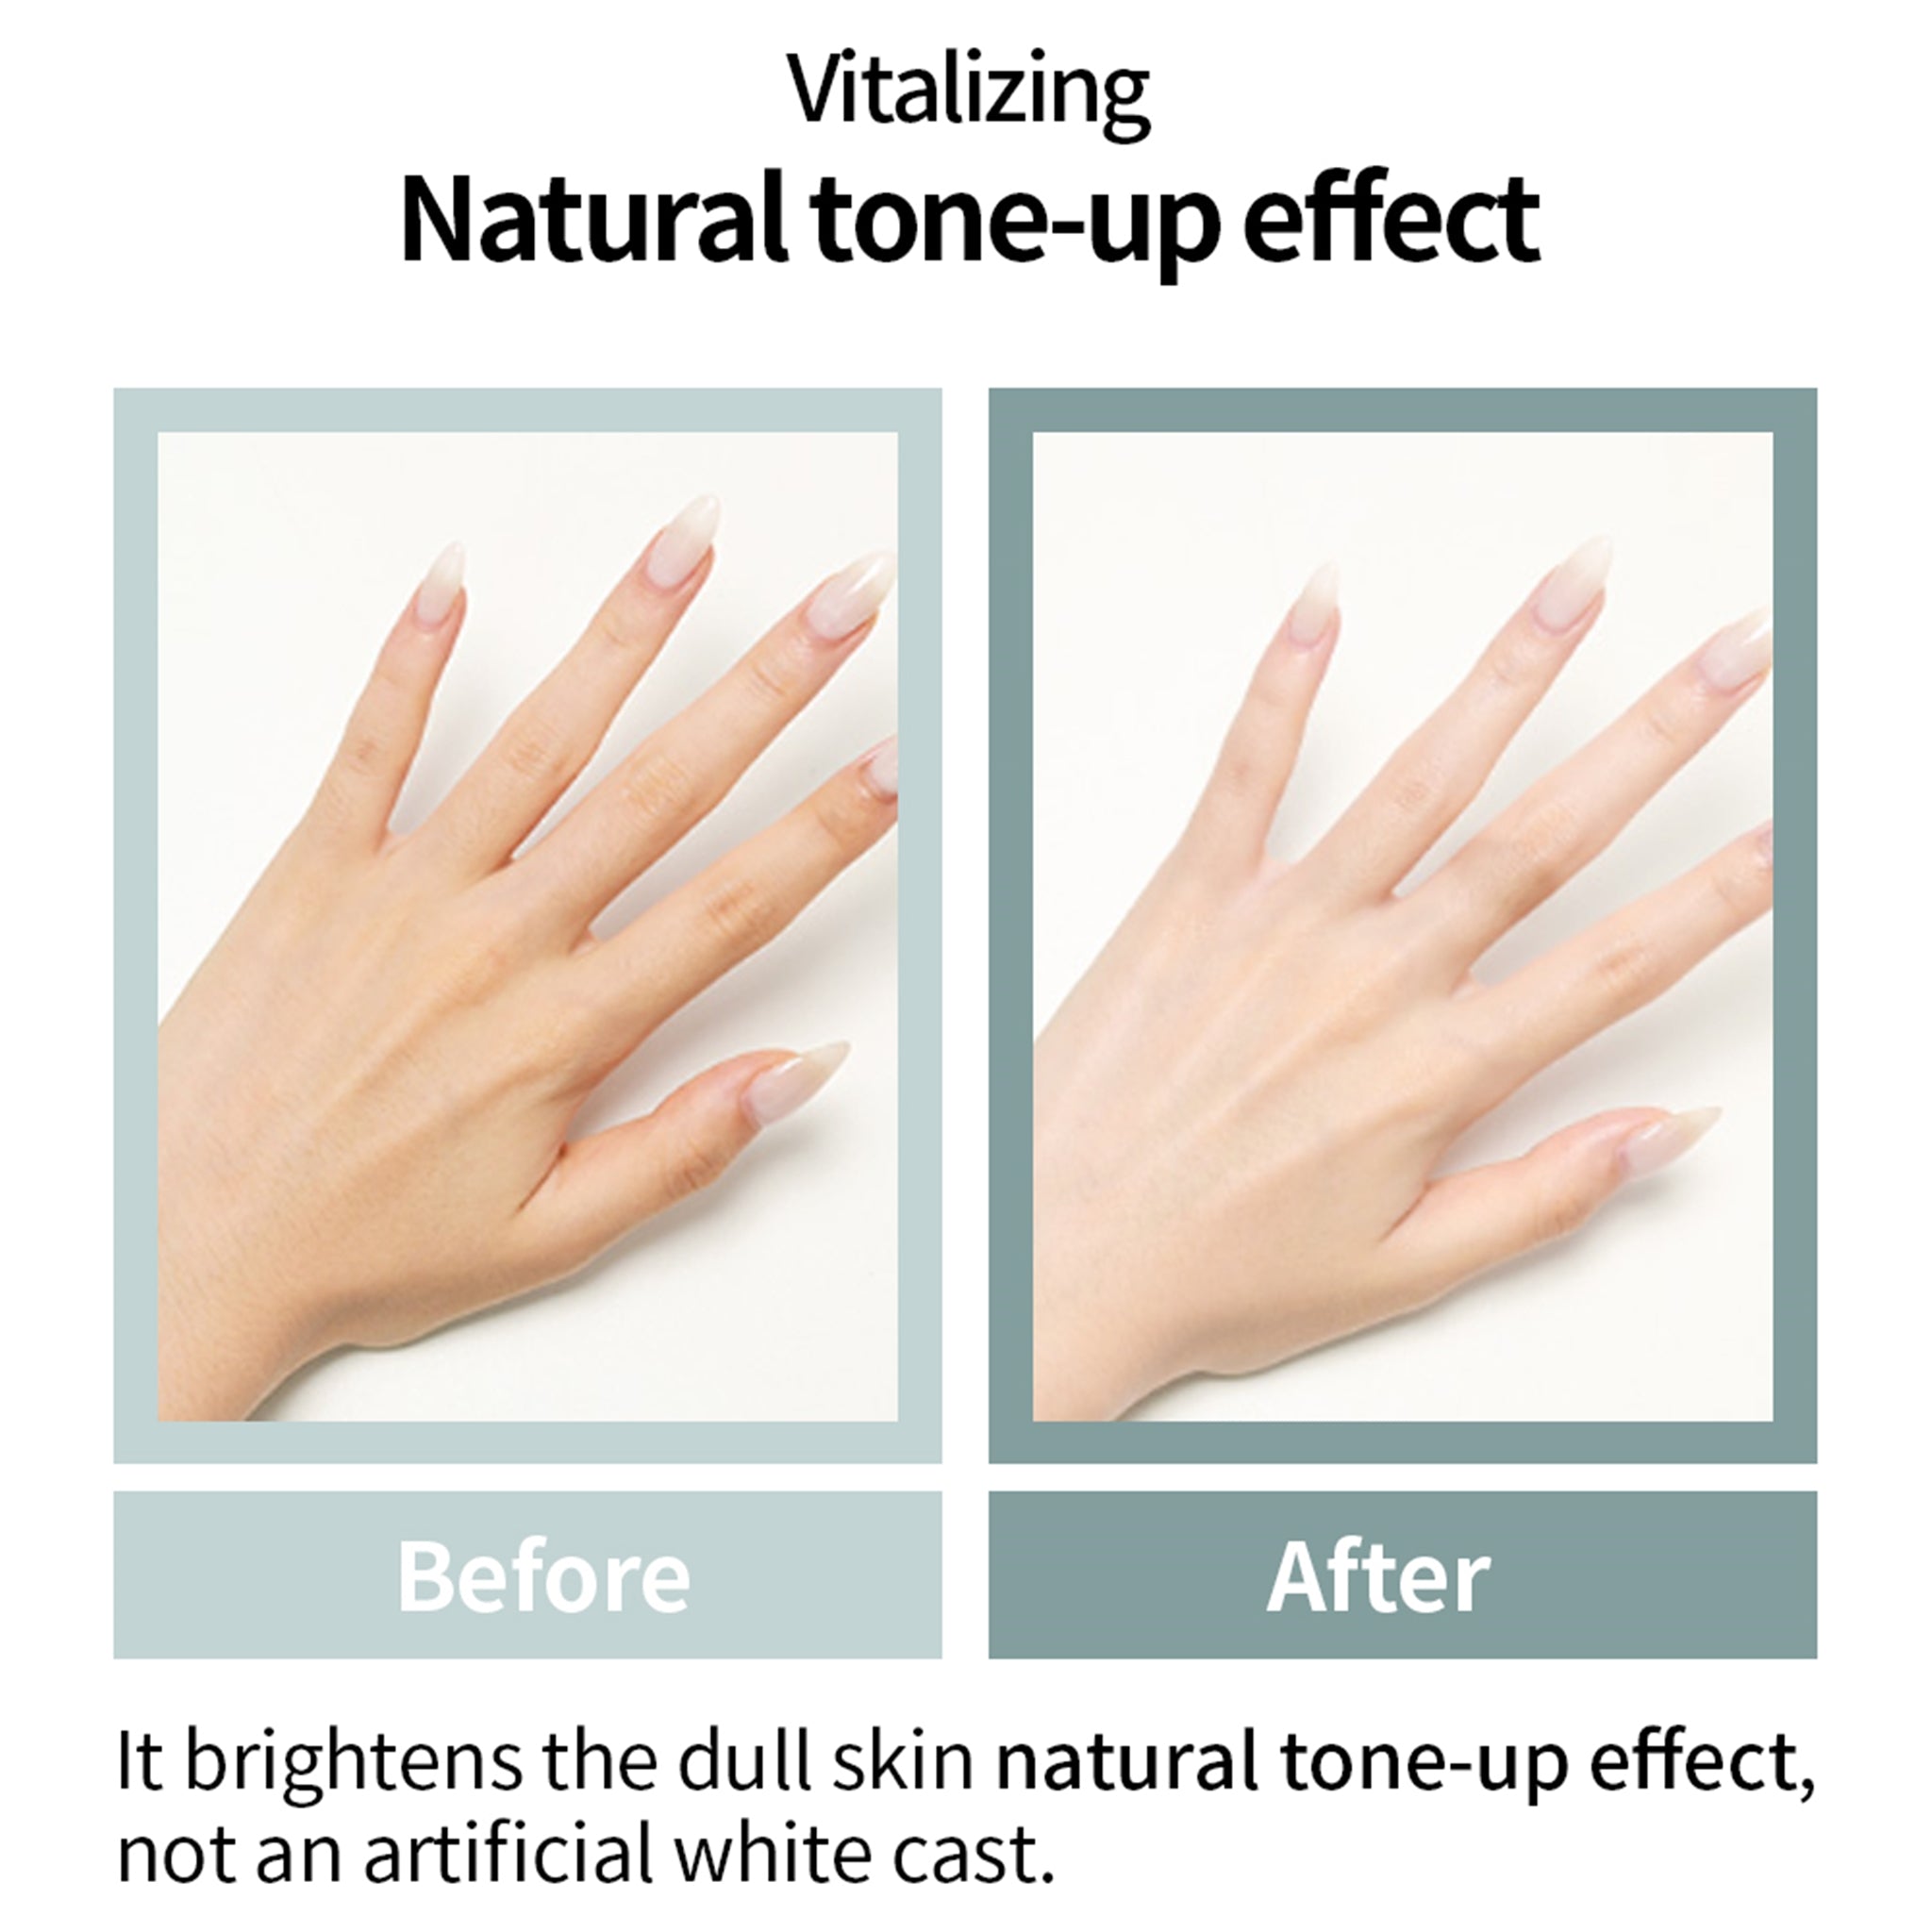 comparing hands tone before and after using sunscreen